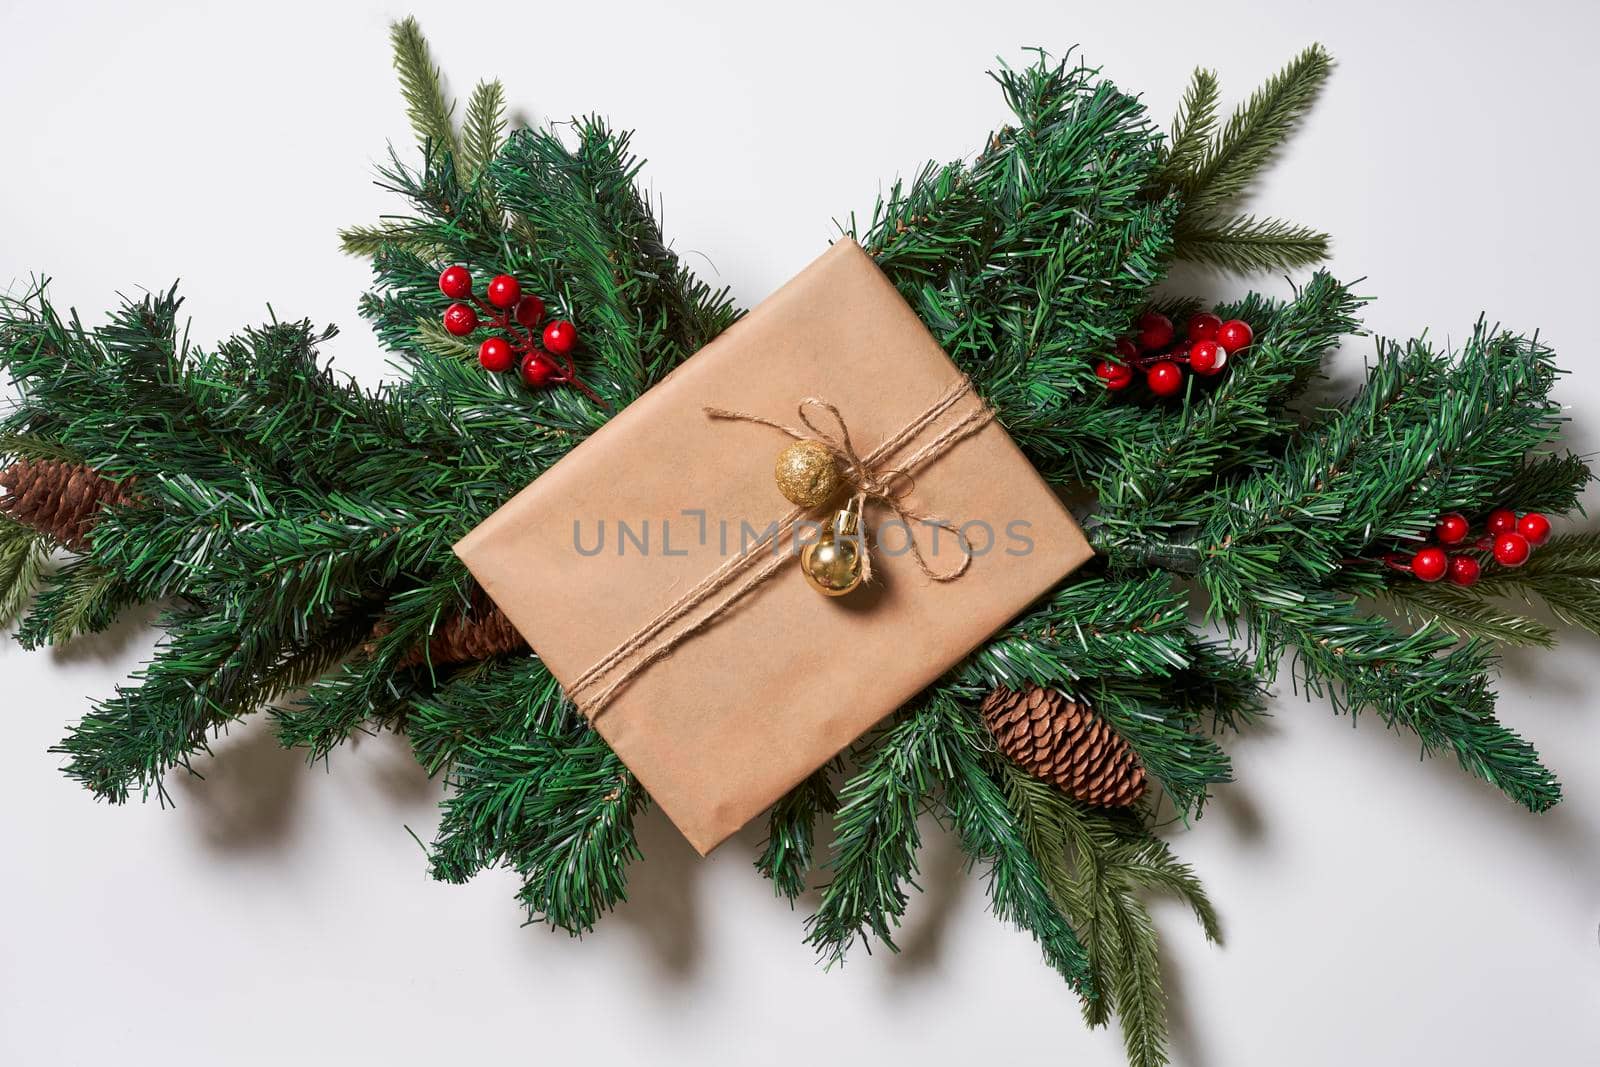 Branches of spruce tree with pine cones and Christmas toy decorations on white background. Top view. Copy space